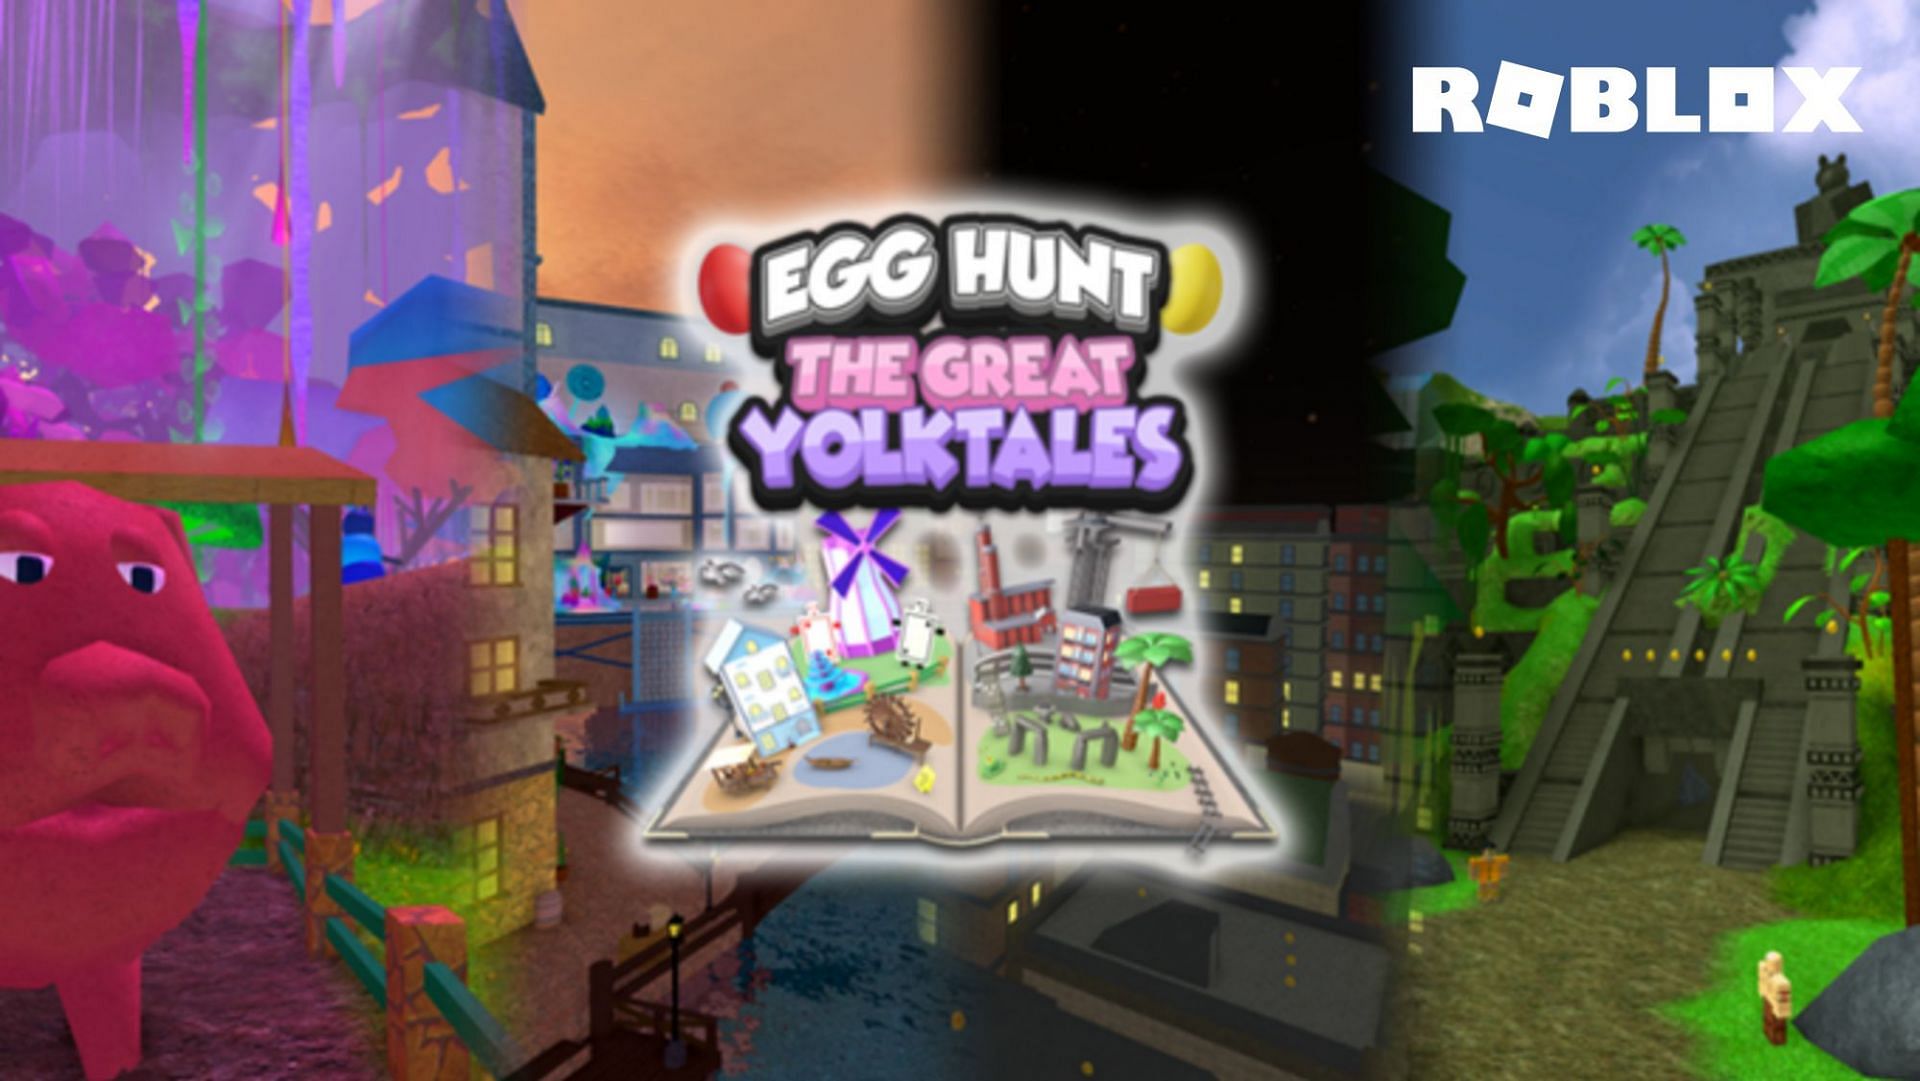 A Terrible Gift From Roblox? Old Egg Hunts Updated? Weird Limited Bugs! AND  MORE! (ROBLOX NEWS) 